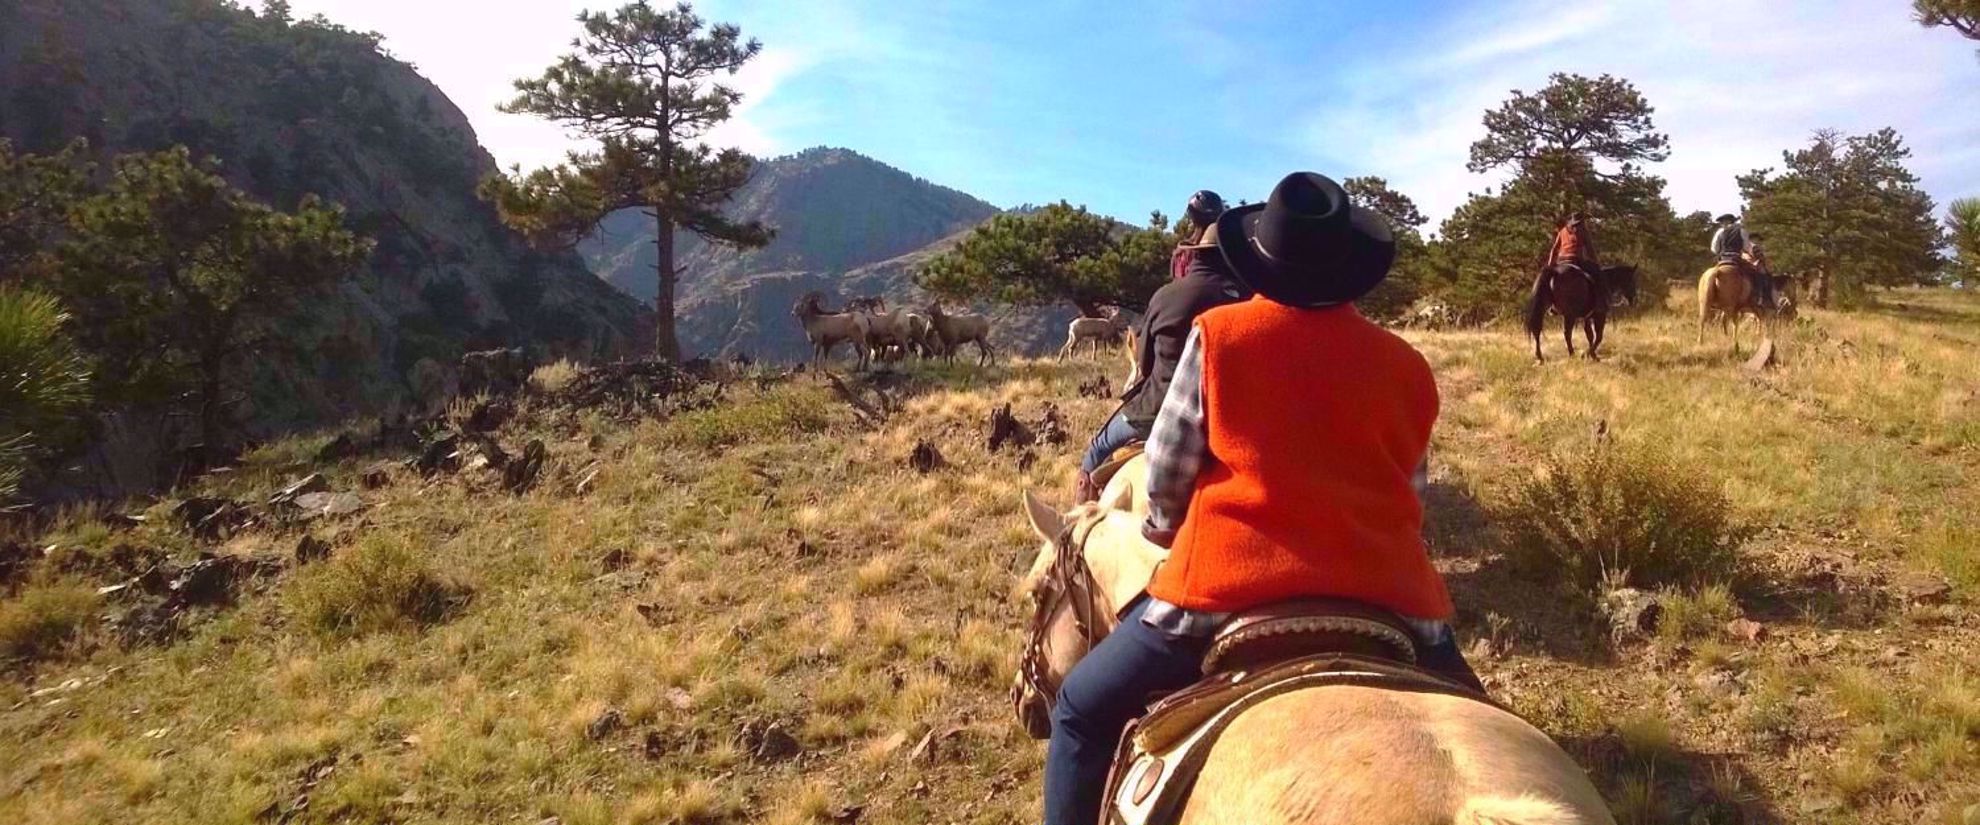 spotting wildlife along your trail ride